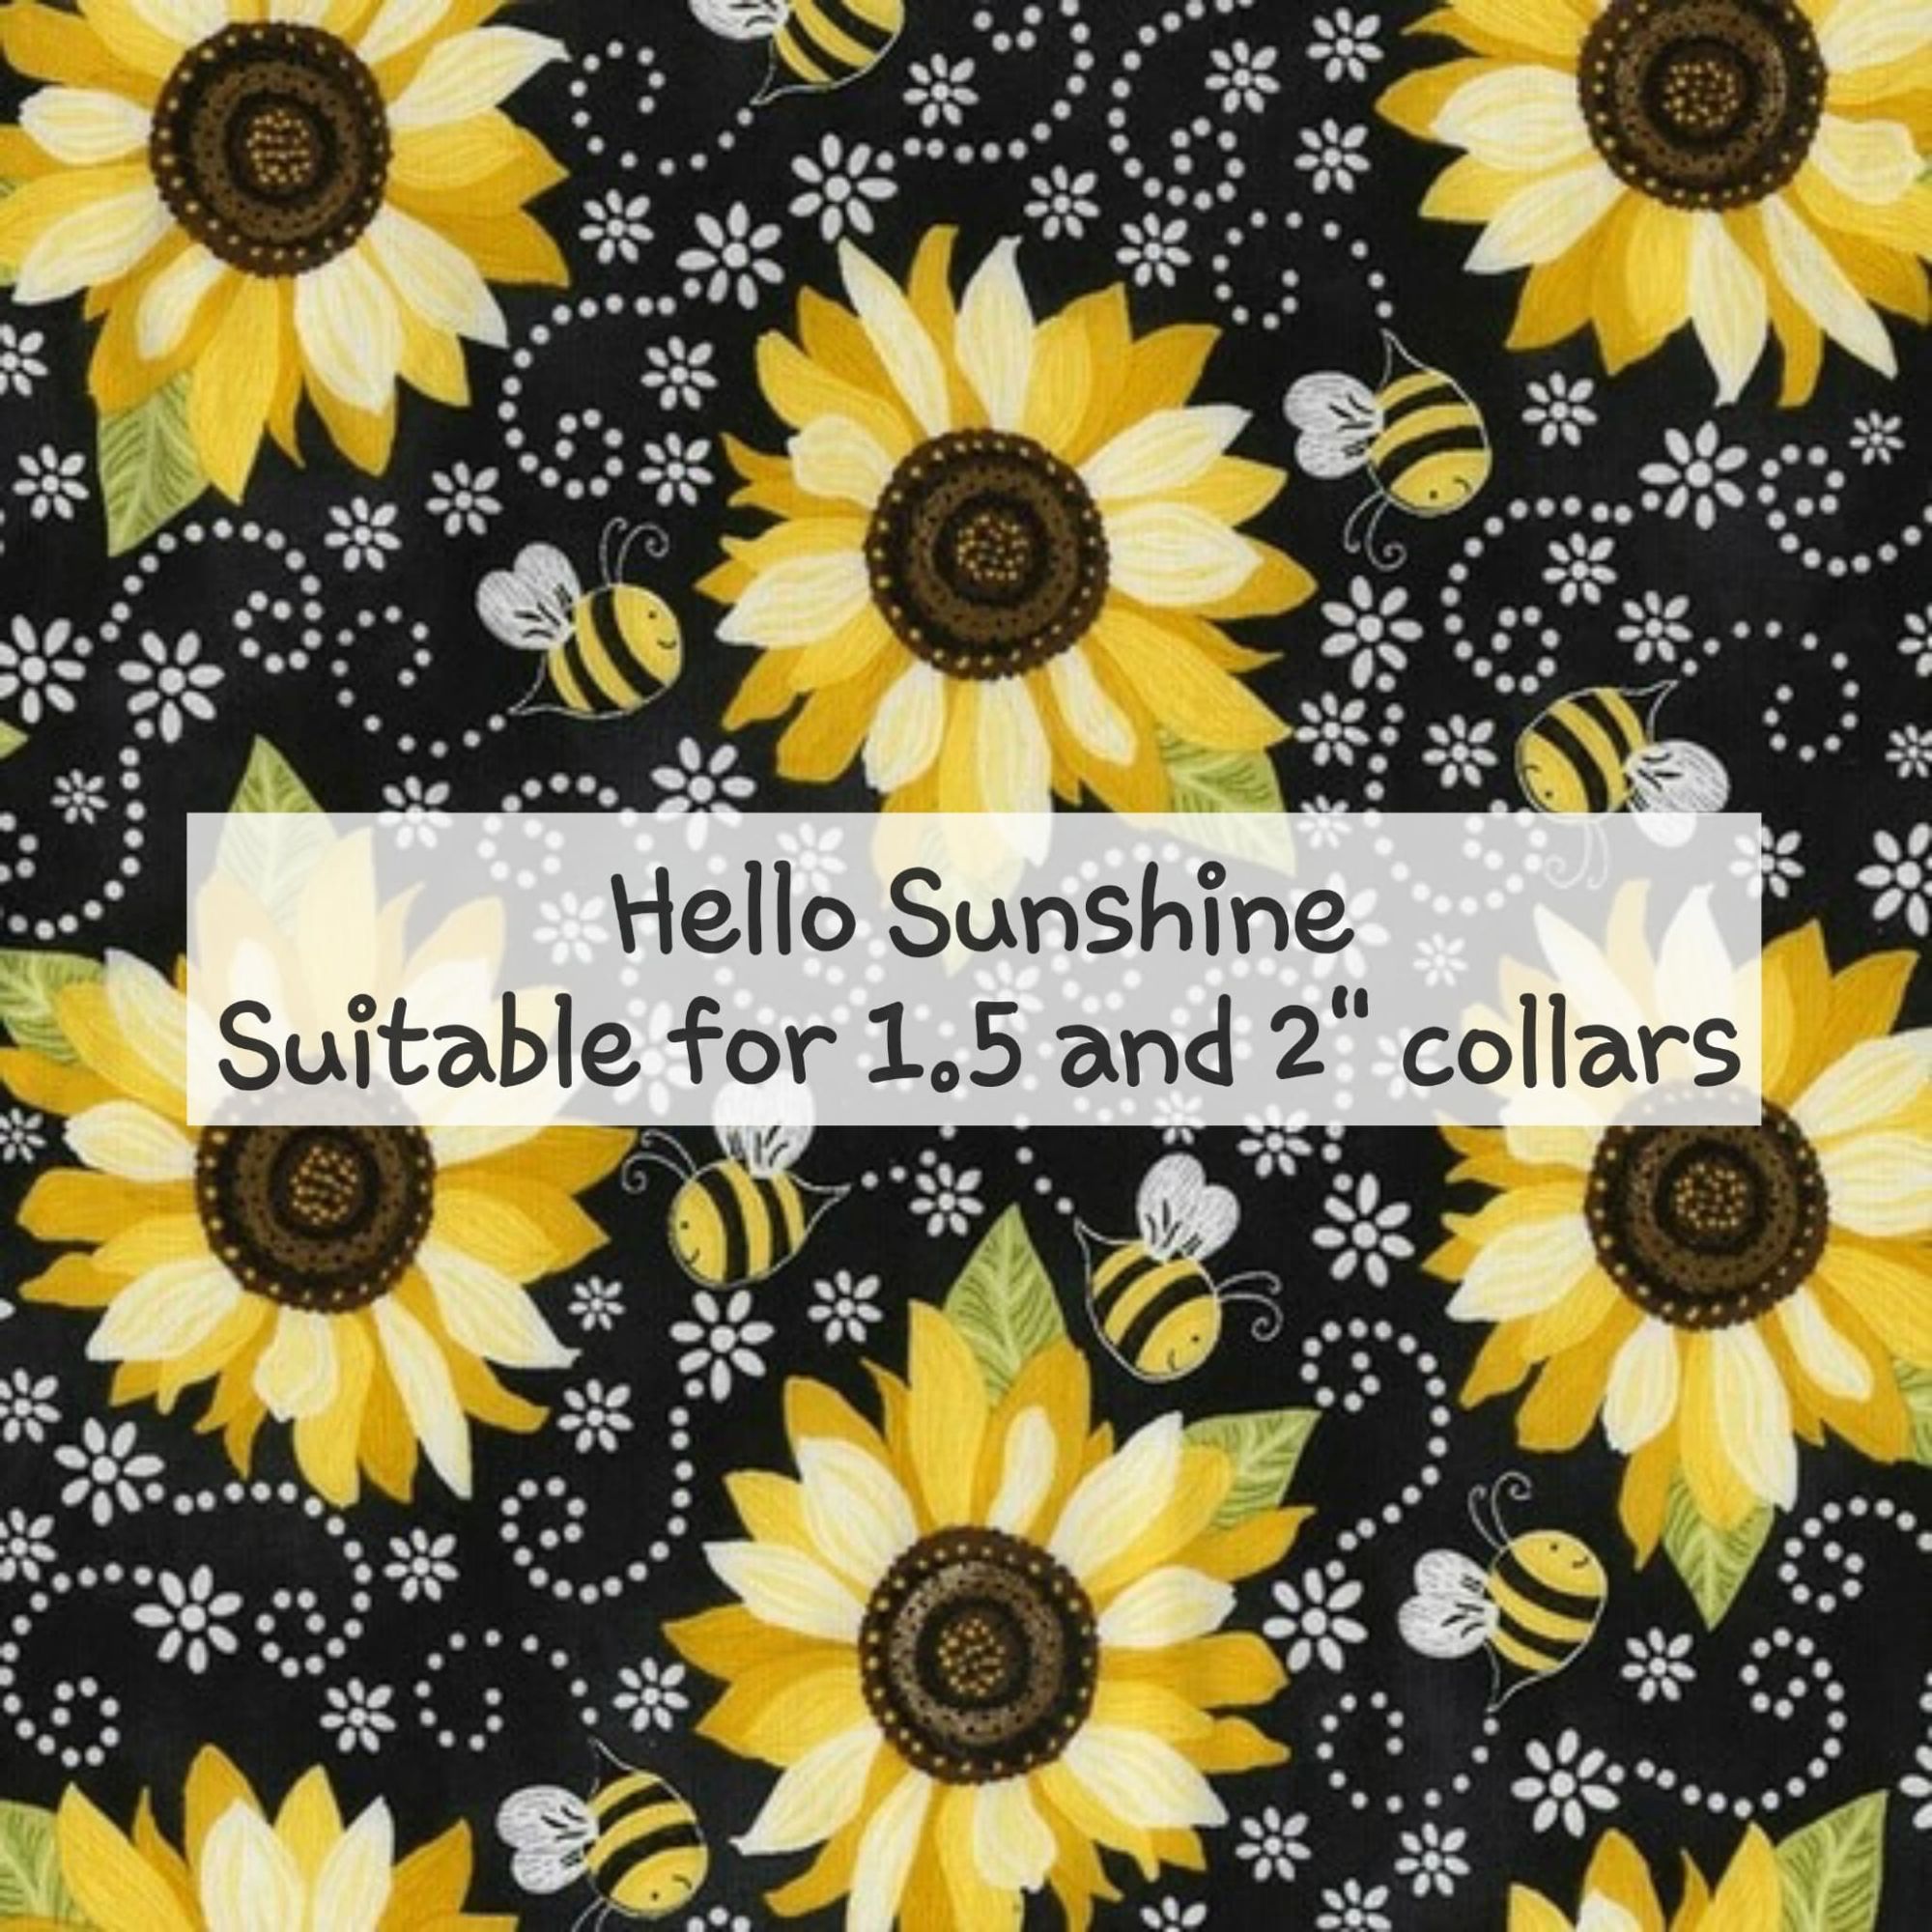 Hello Sunshine - Sutiable for 1.5 and 2 inch collars